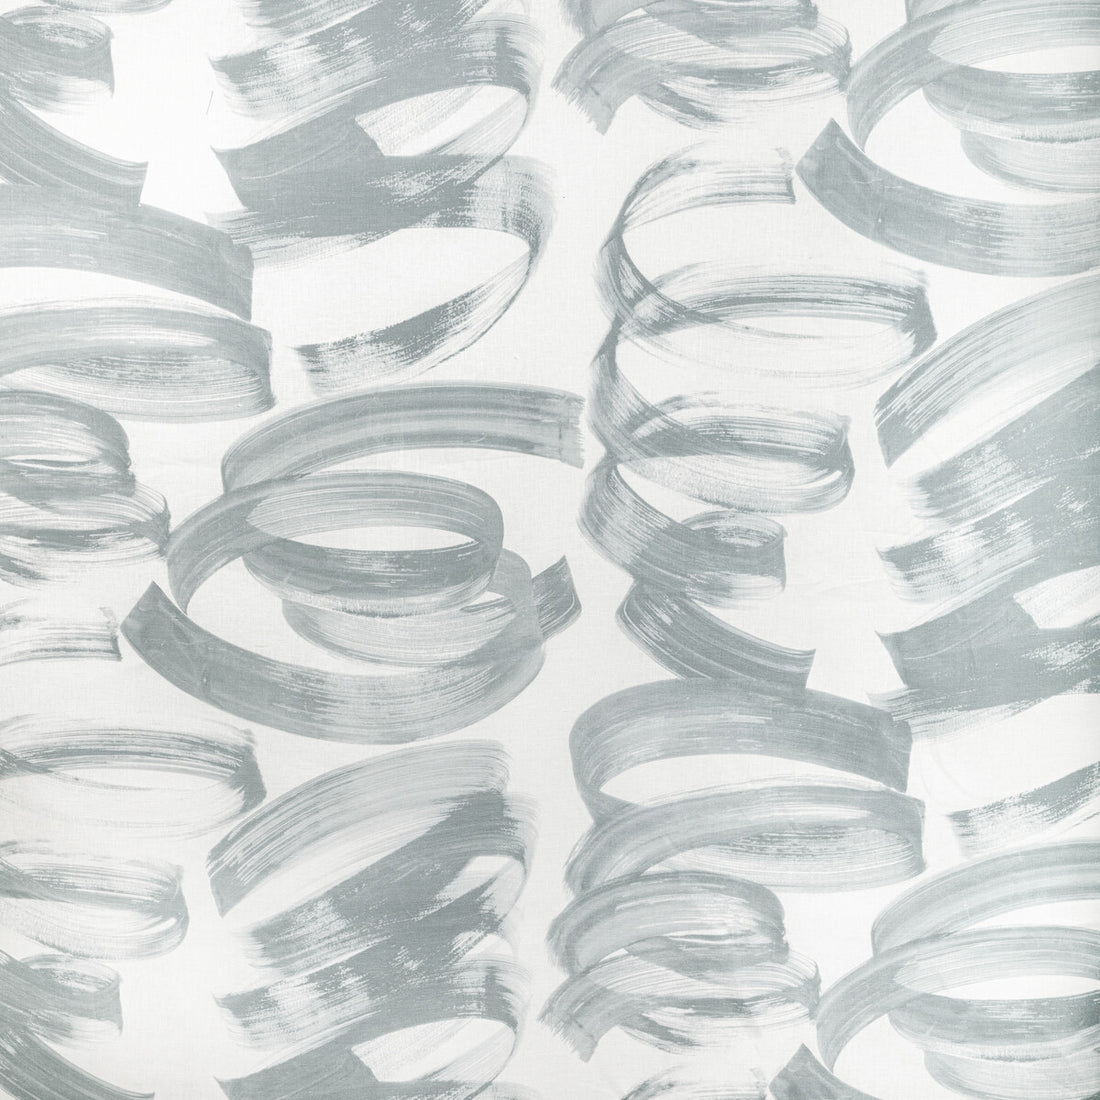 Laryo Print fabric in stone color - pattern GWF-3773.11.0 - by Lee Jofa Modern in the Rhapsody collection